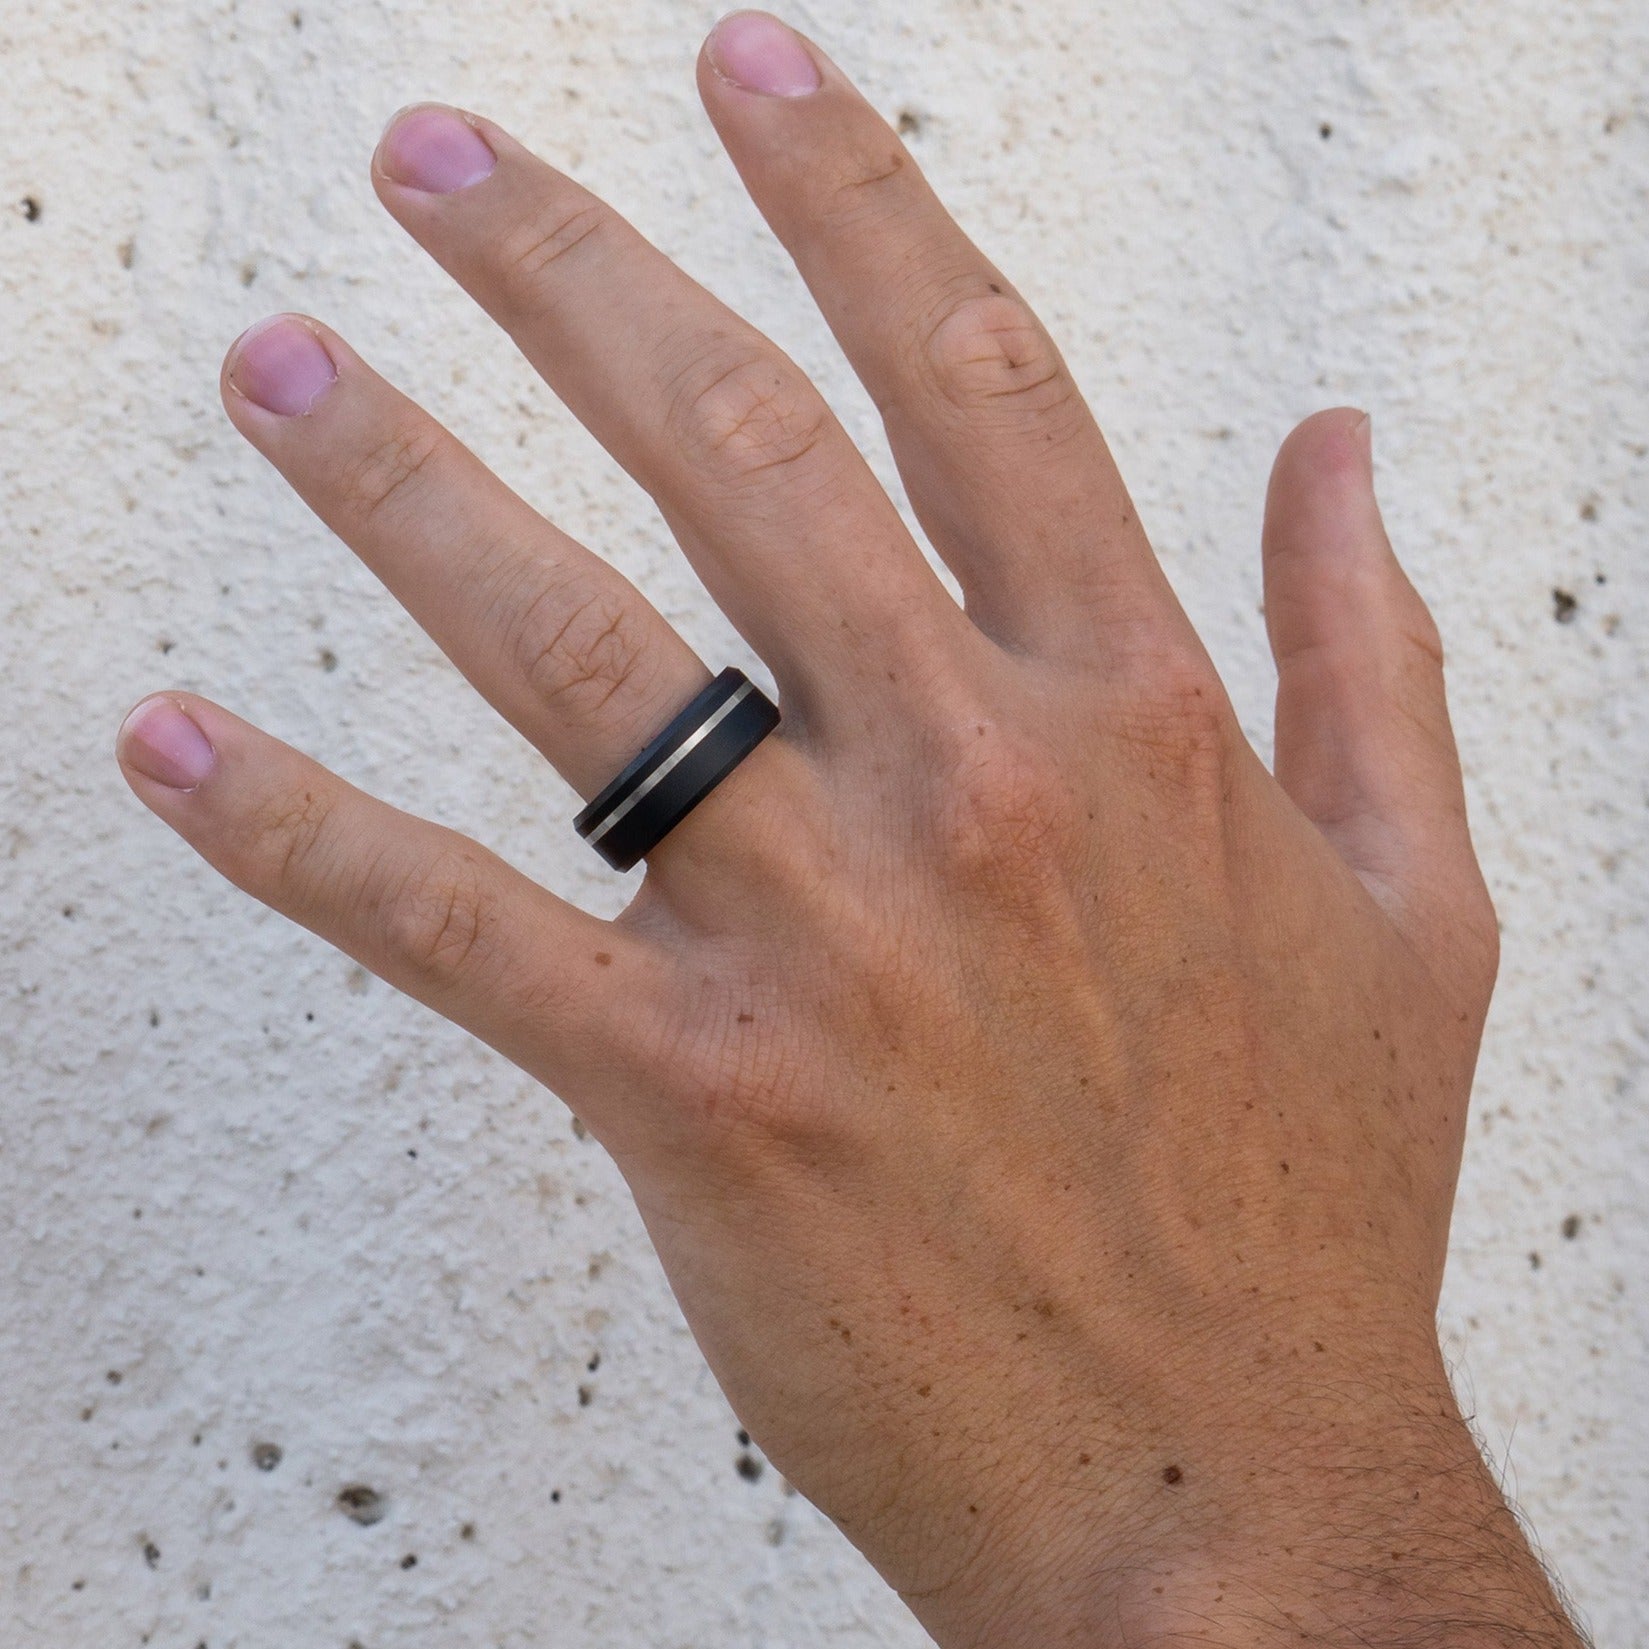 Men's Black Diamond Ring w/ Silver Inlay Lifestyle Shot #2 | Elysium ARES | Black and Silver Ring | Ring Black Silver | Black Diamond Ring Silver